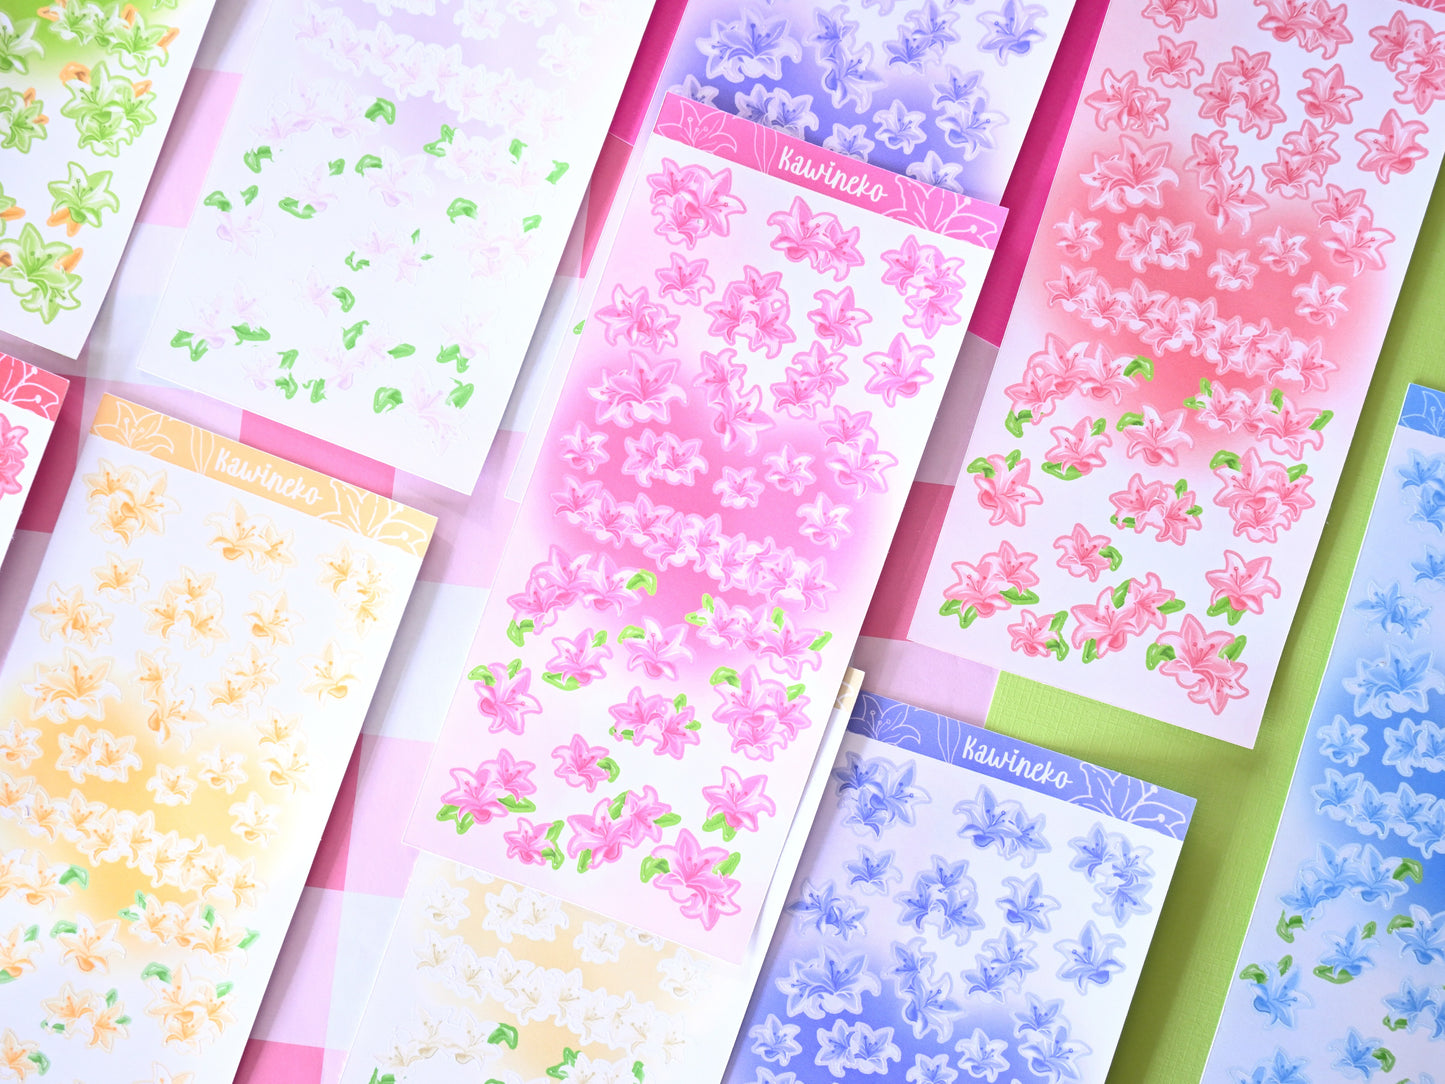 Lilies flowers stickers journaling polcos toploaders deco stickers